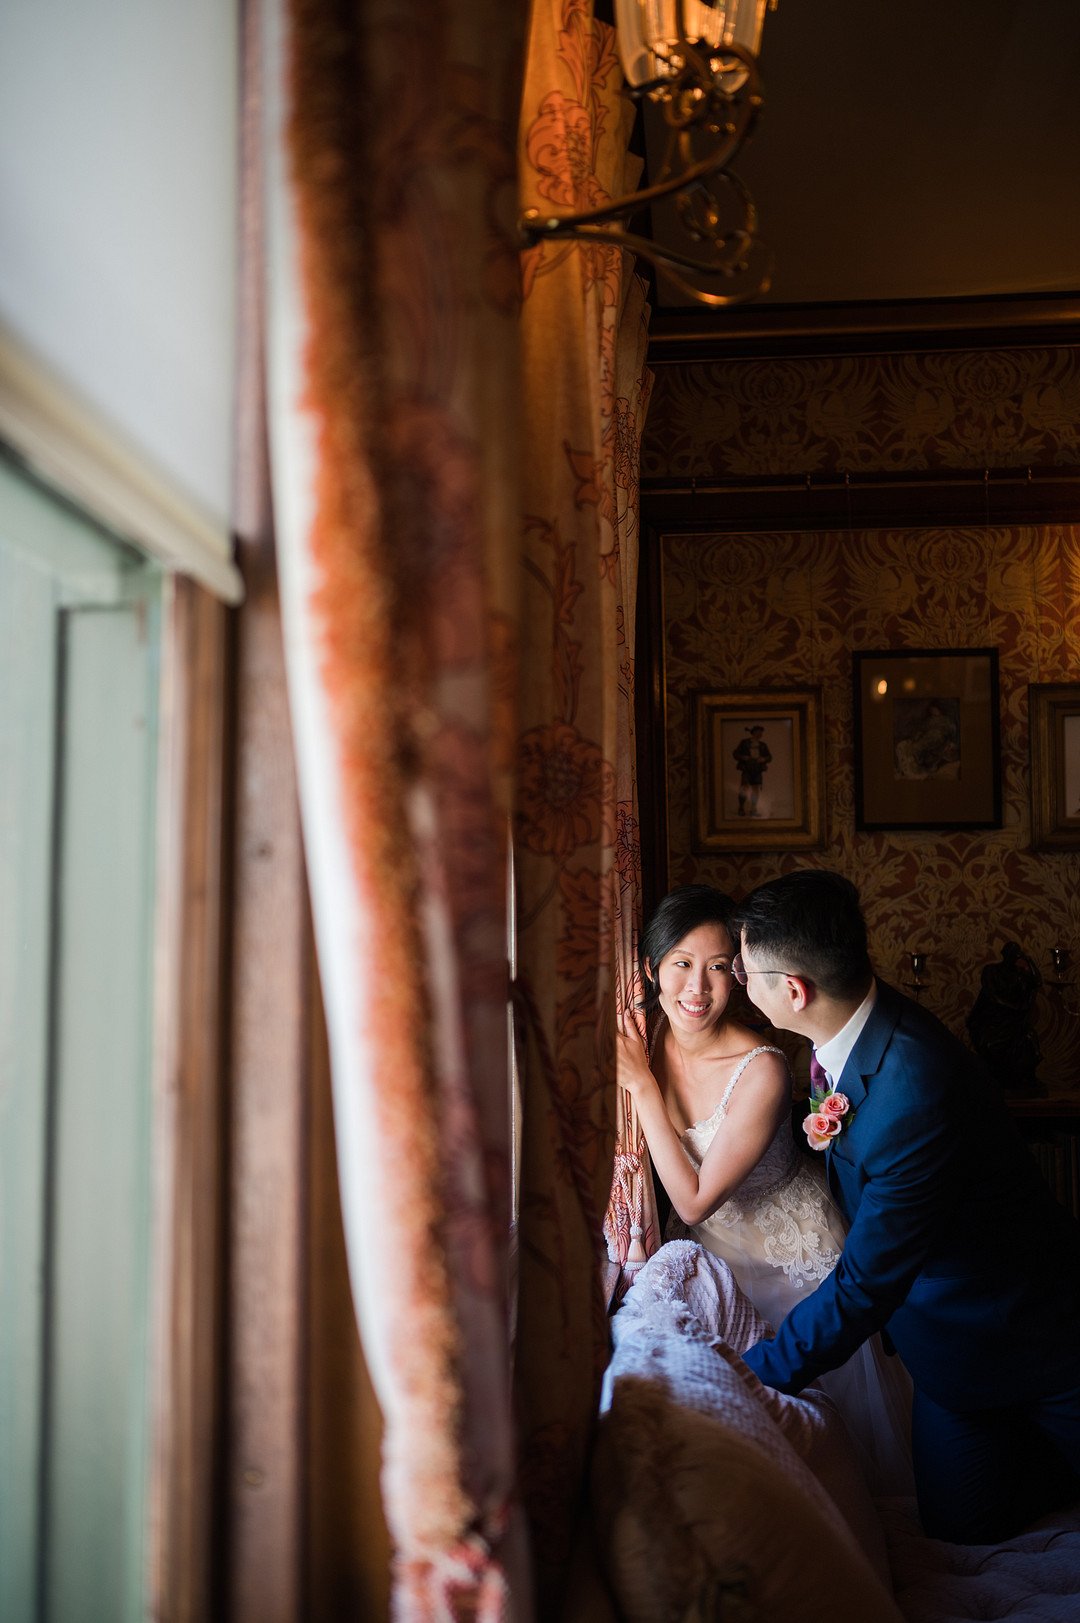 Chan_Chan_Winterlyn Photography_GLESSNER HOUSE CHICAGO WEDDING-41_low.jpg